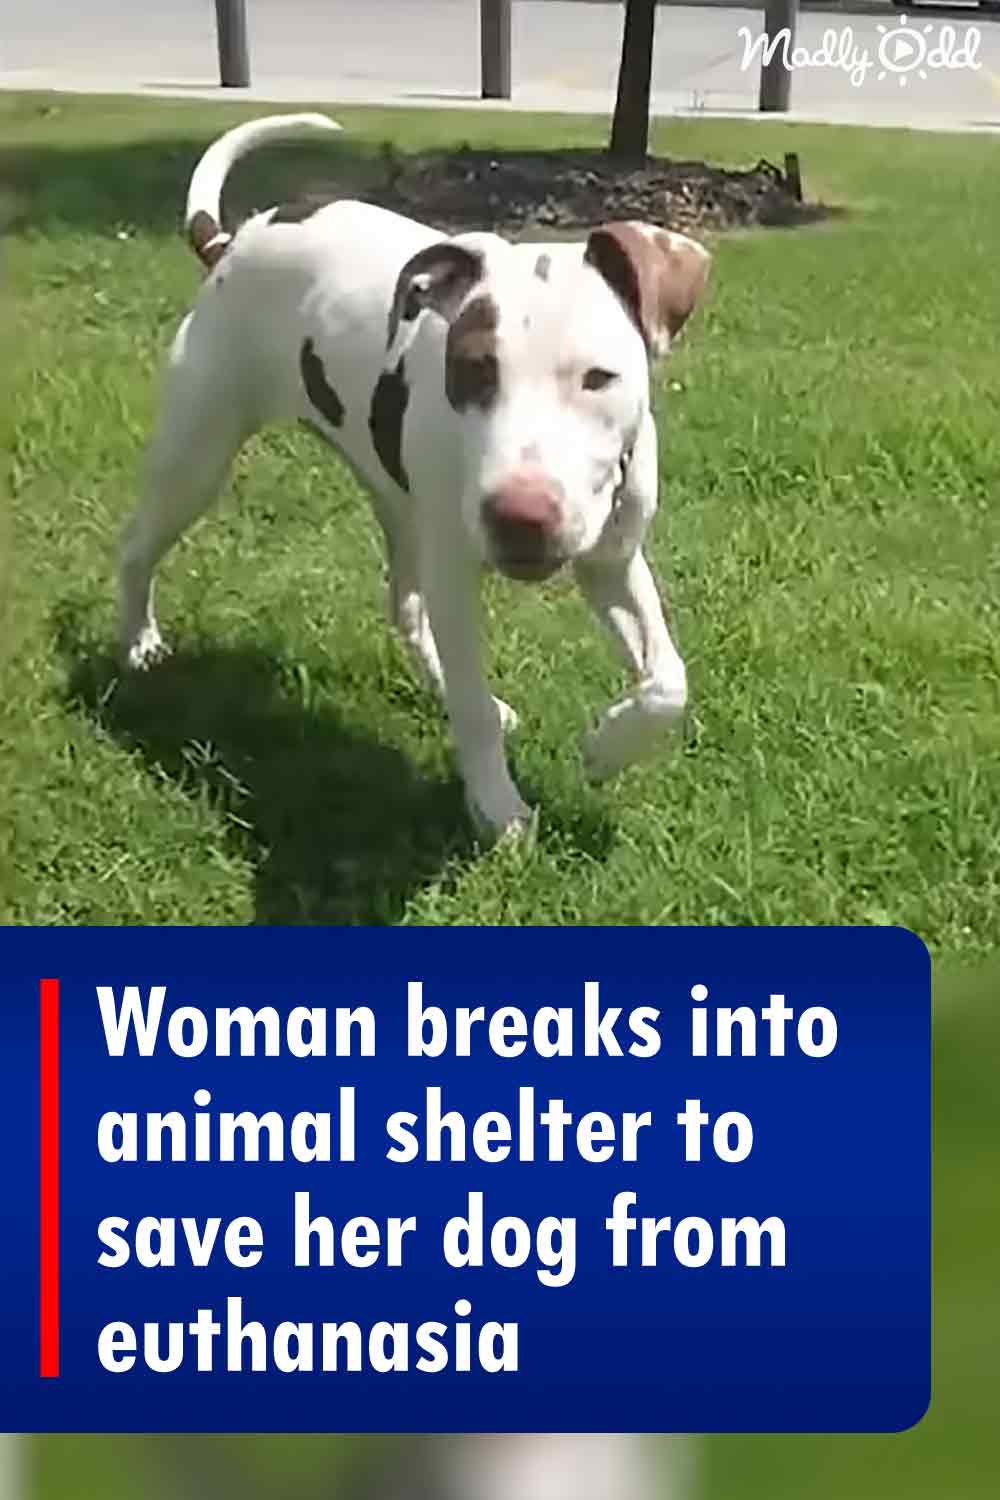 Woman breaks into animal shelter to save her dog from euthanasia